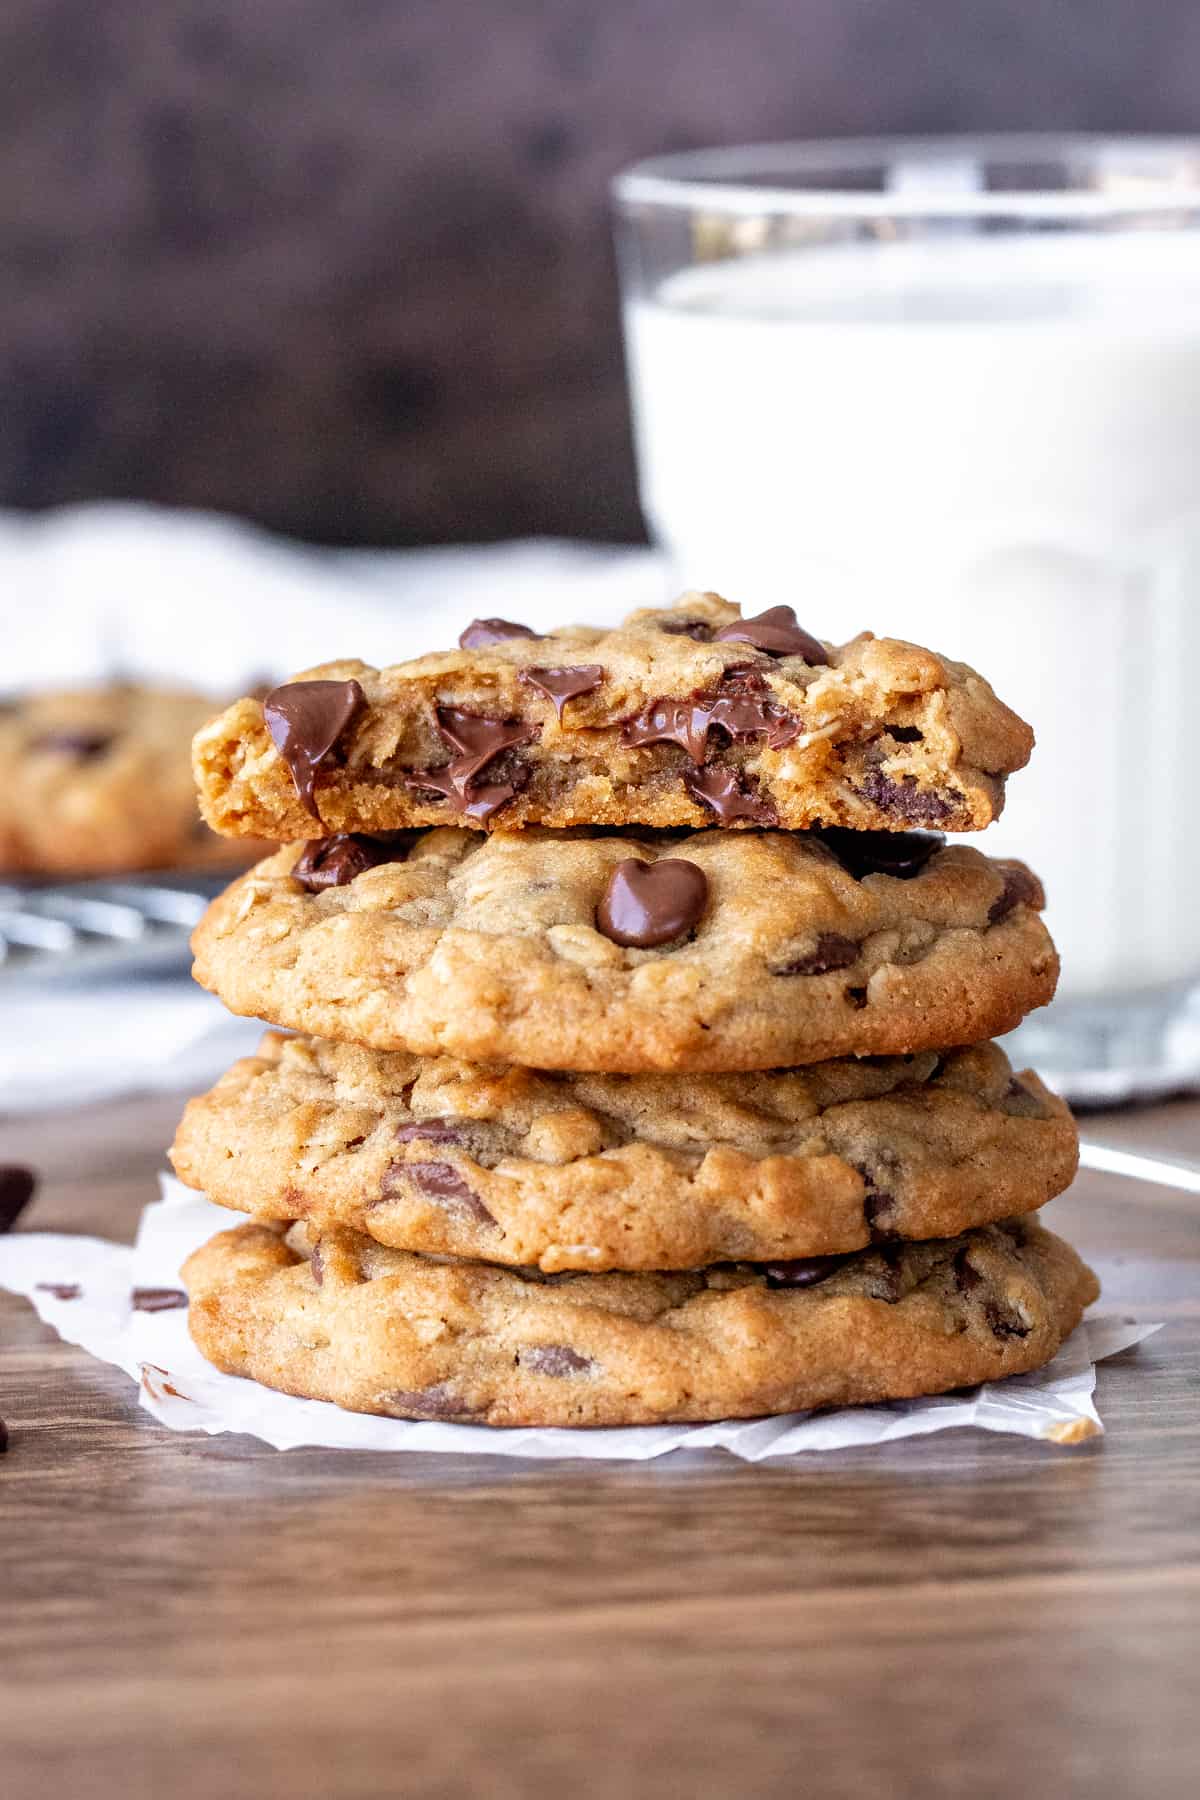 Stack of peanut butter oatmeal chocolate chip cookies with top cookie broken in half